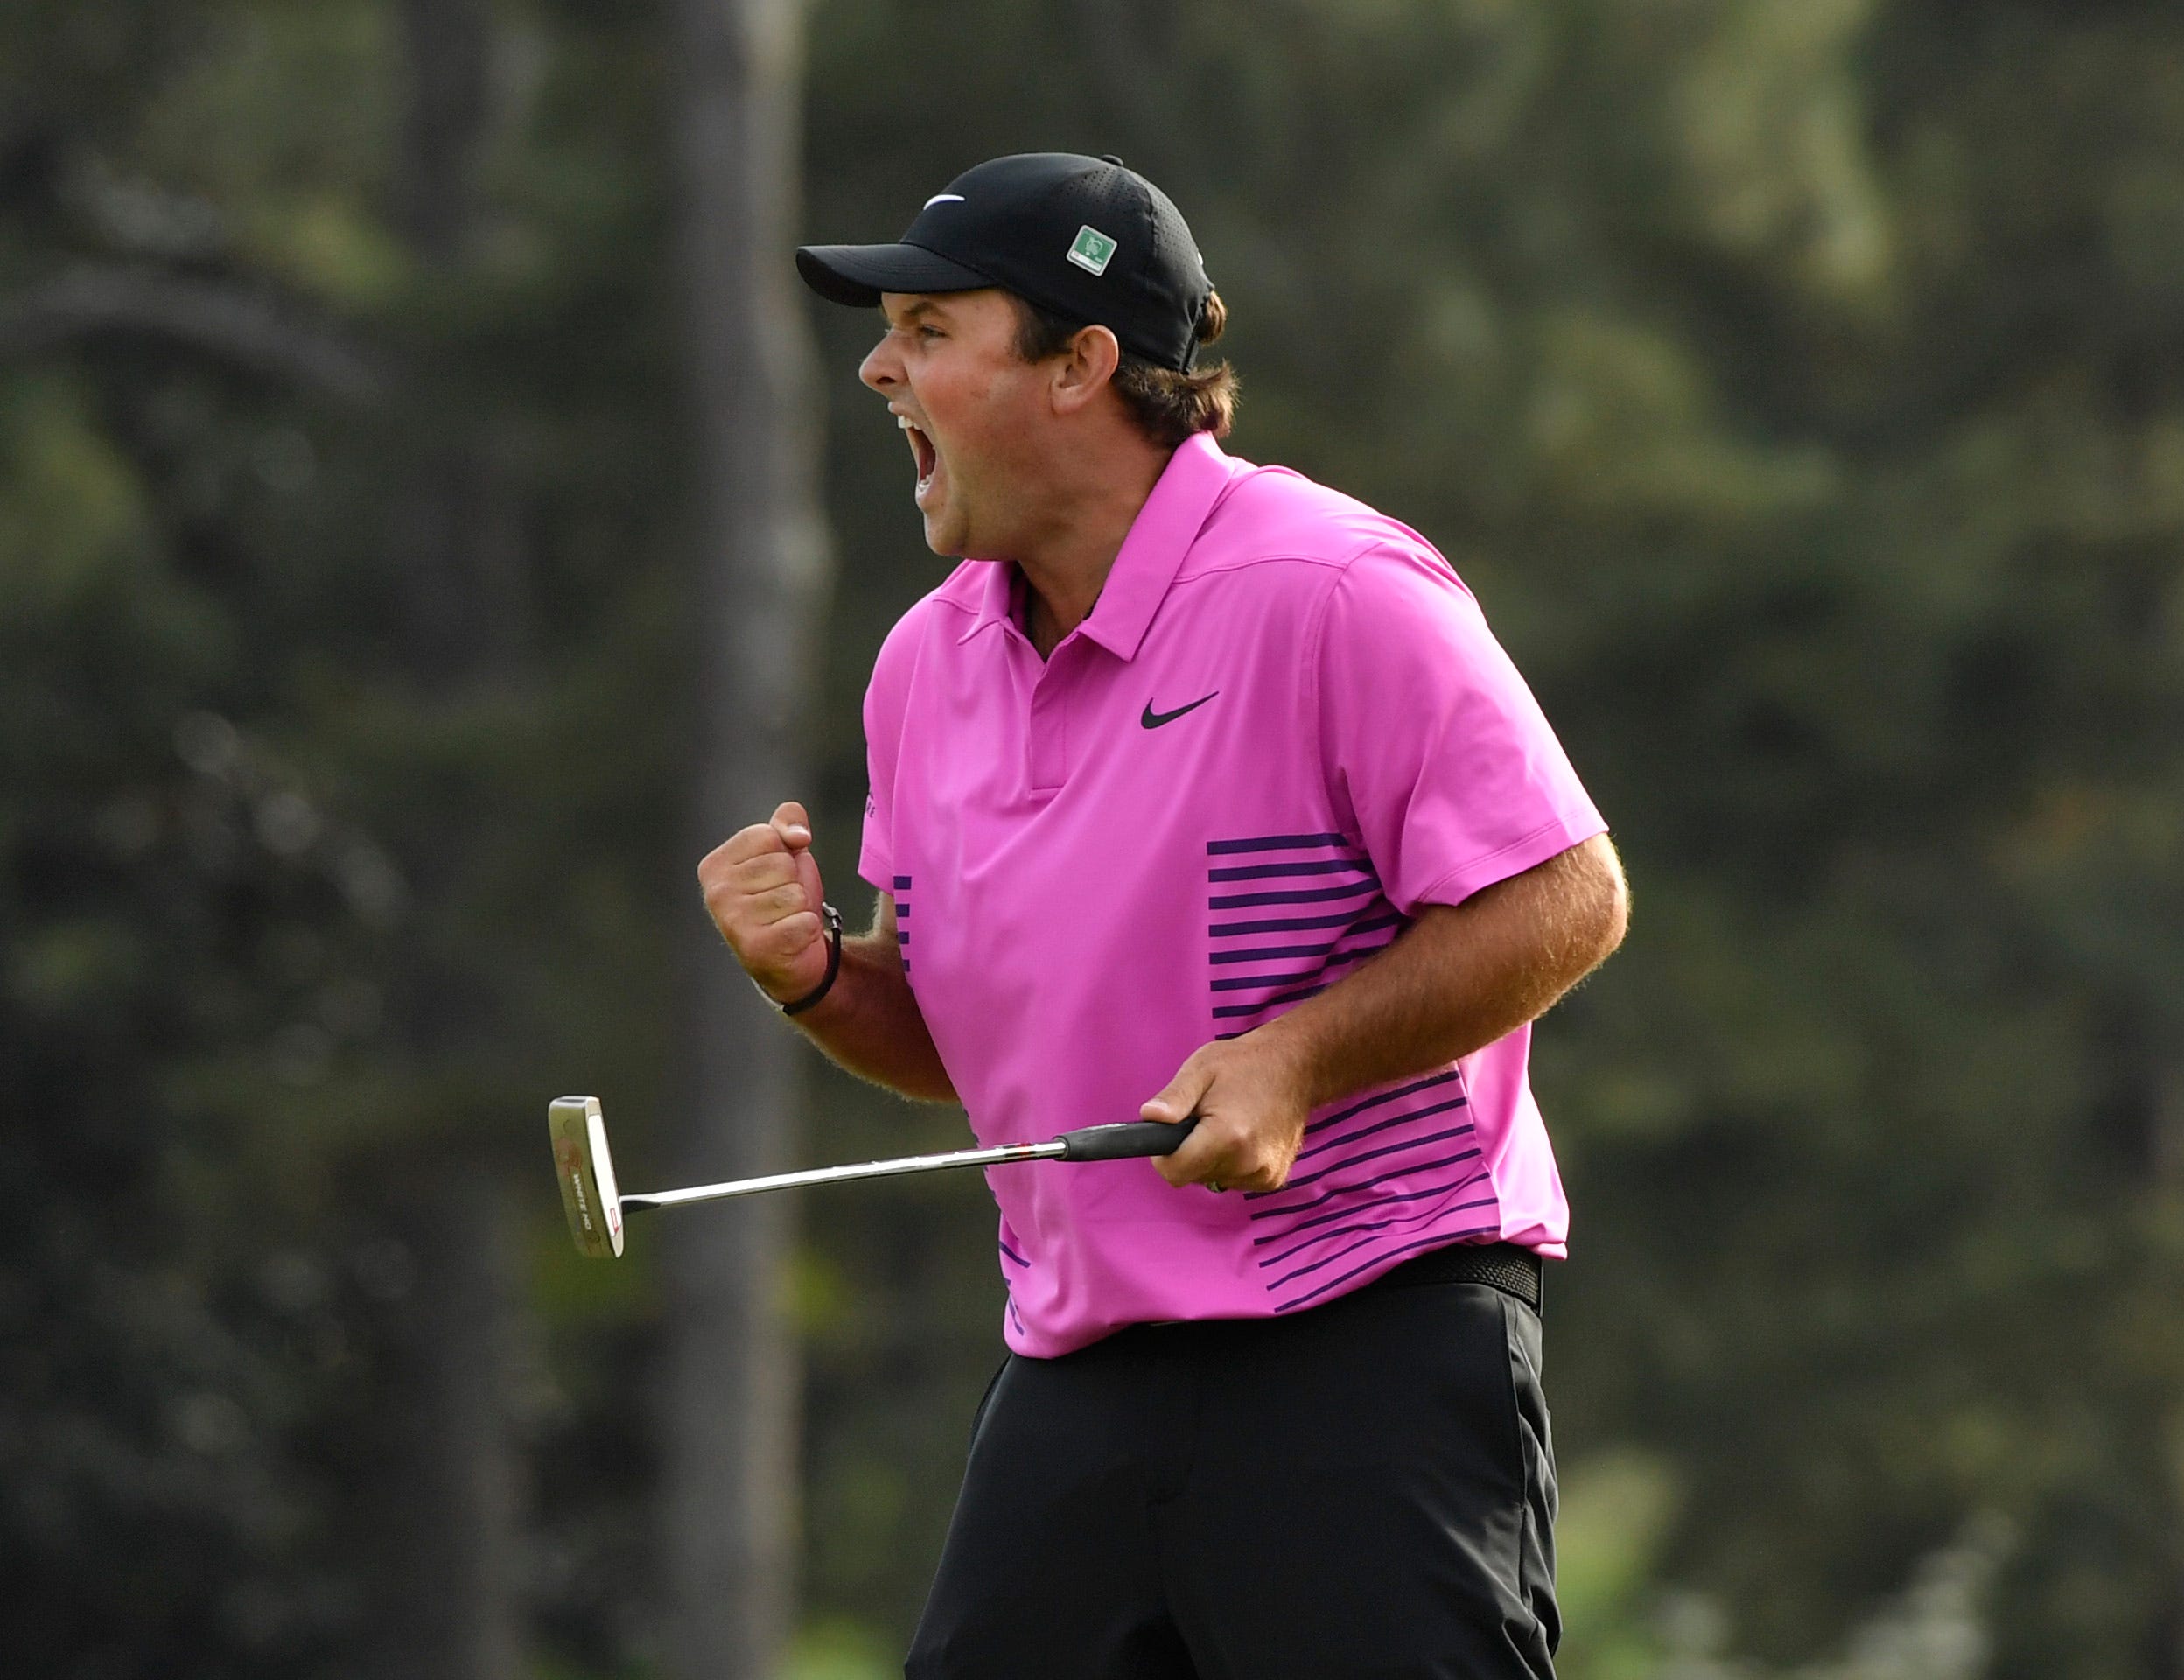 Patrick Reed celebrates after making a putt on the 18th green to win the Masters golf tournament at Augusta National Golf Club in Augusta, Ga.